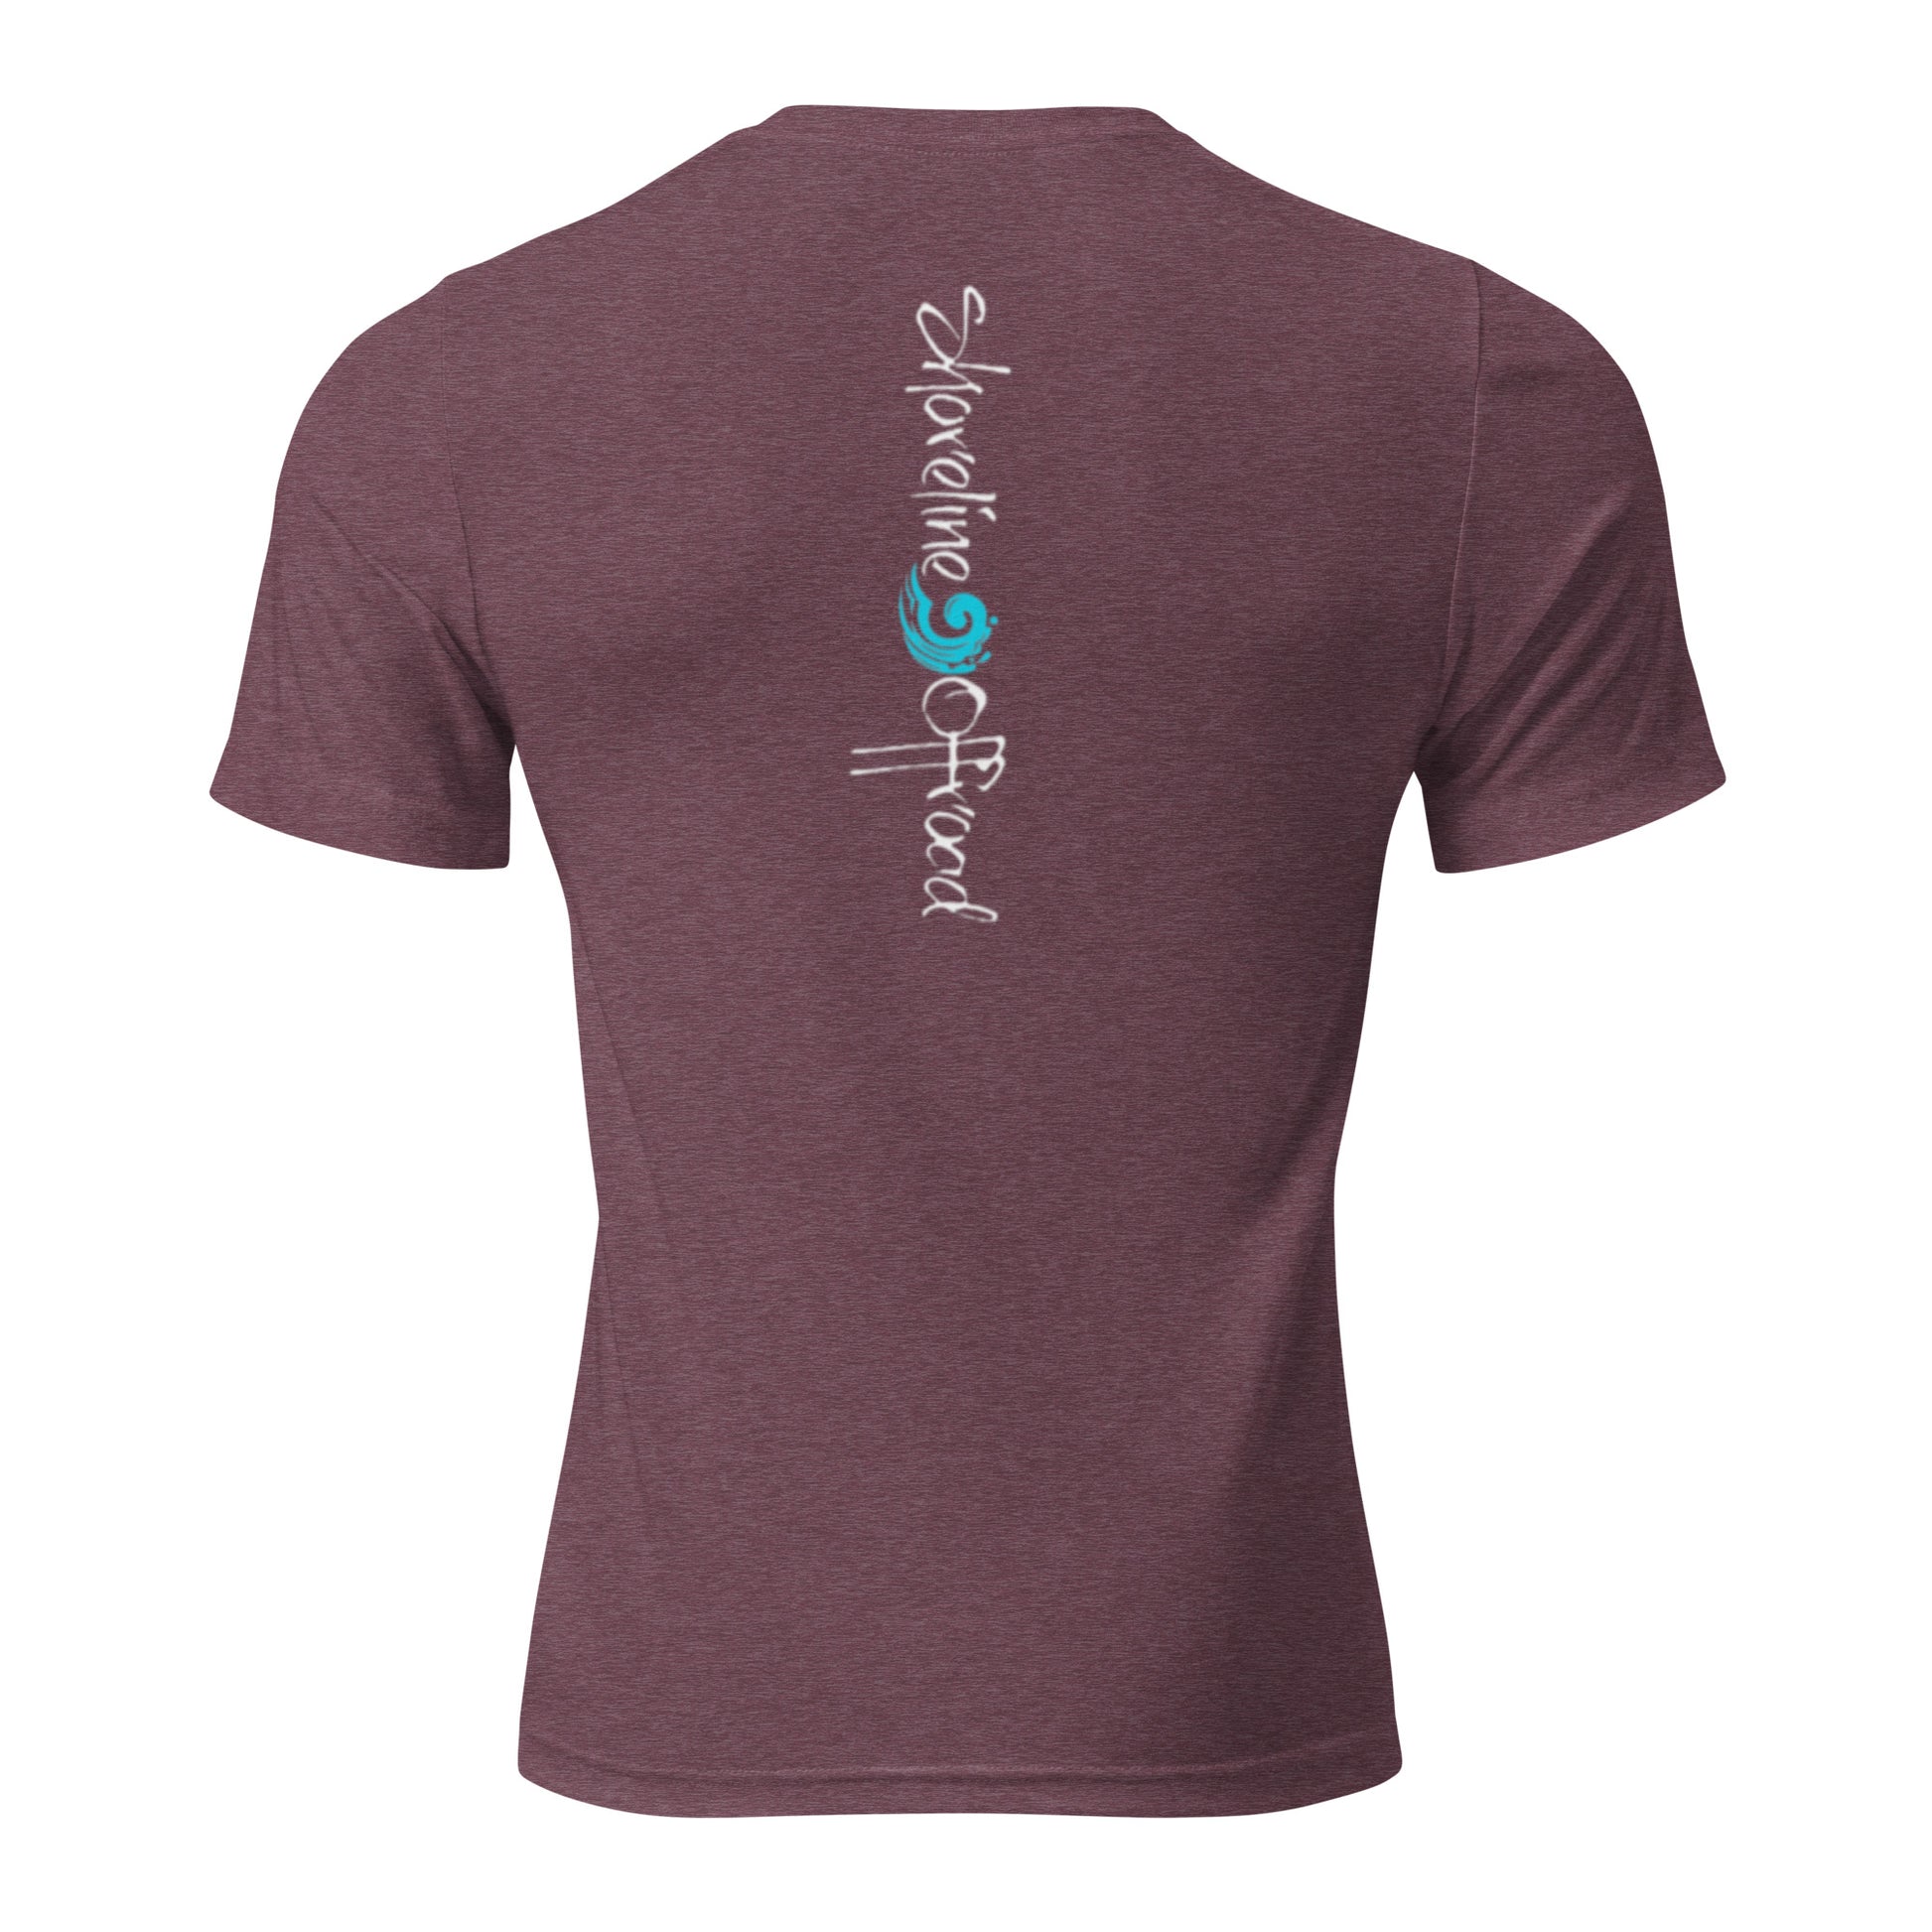 the back of a maroon shirt with a blue and green logo on it